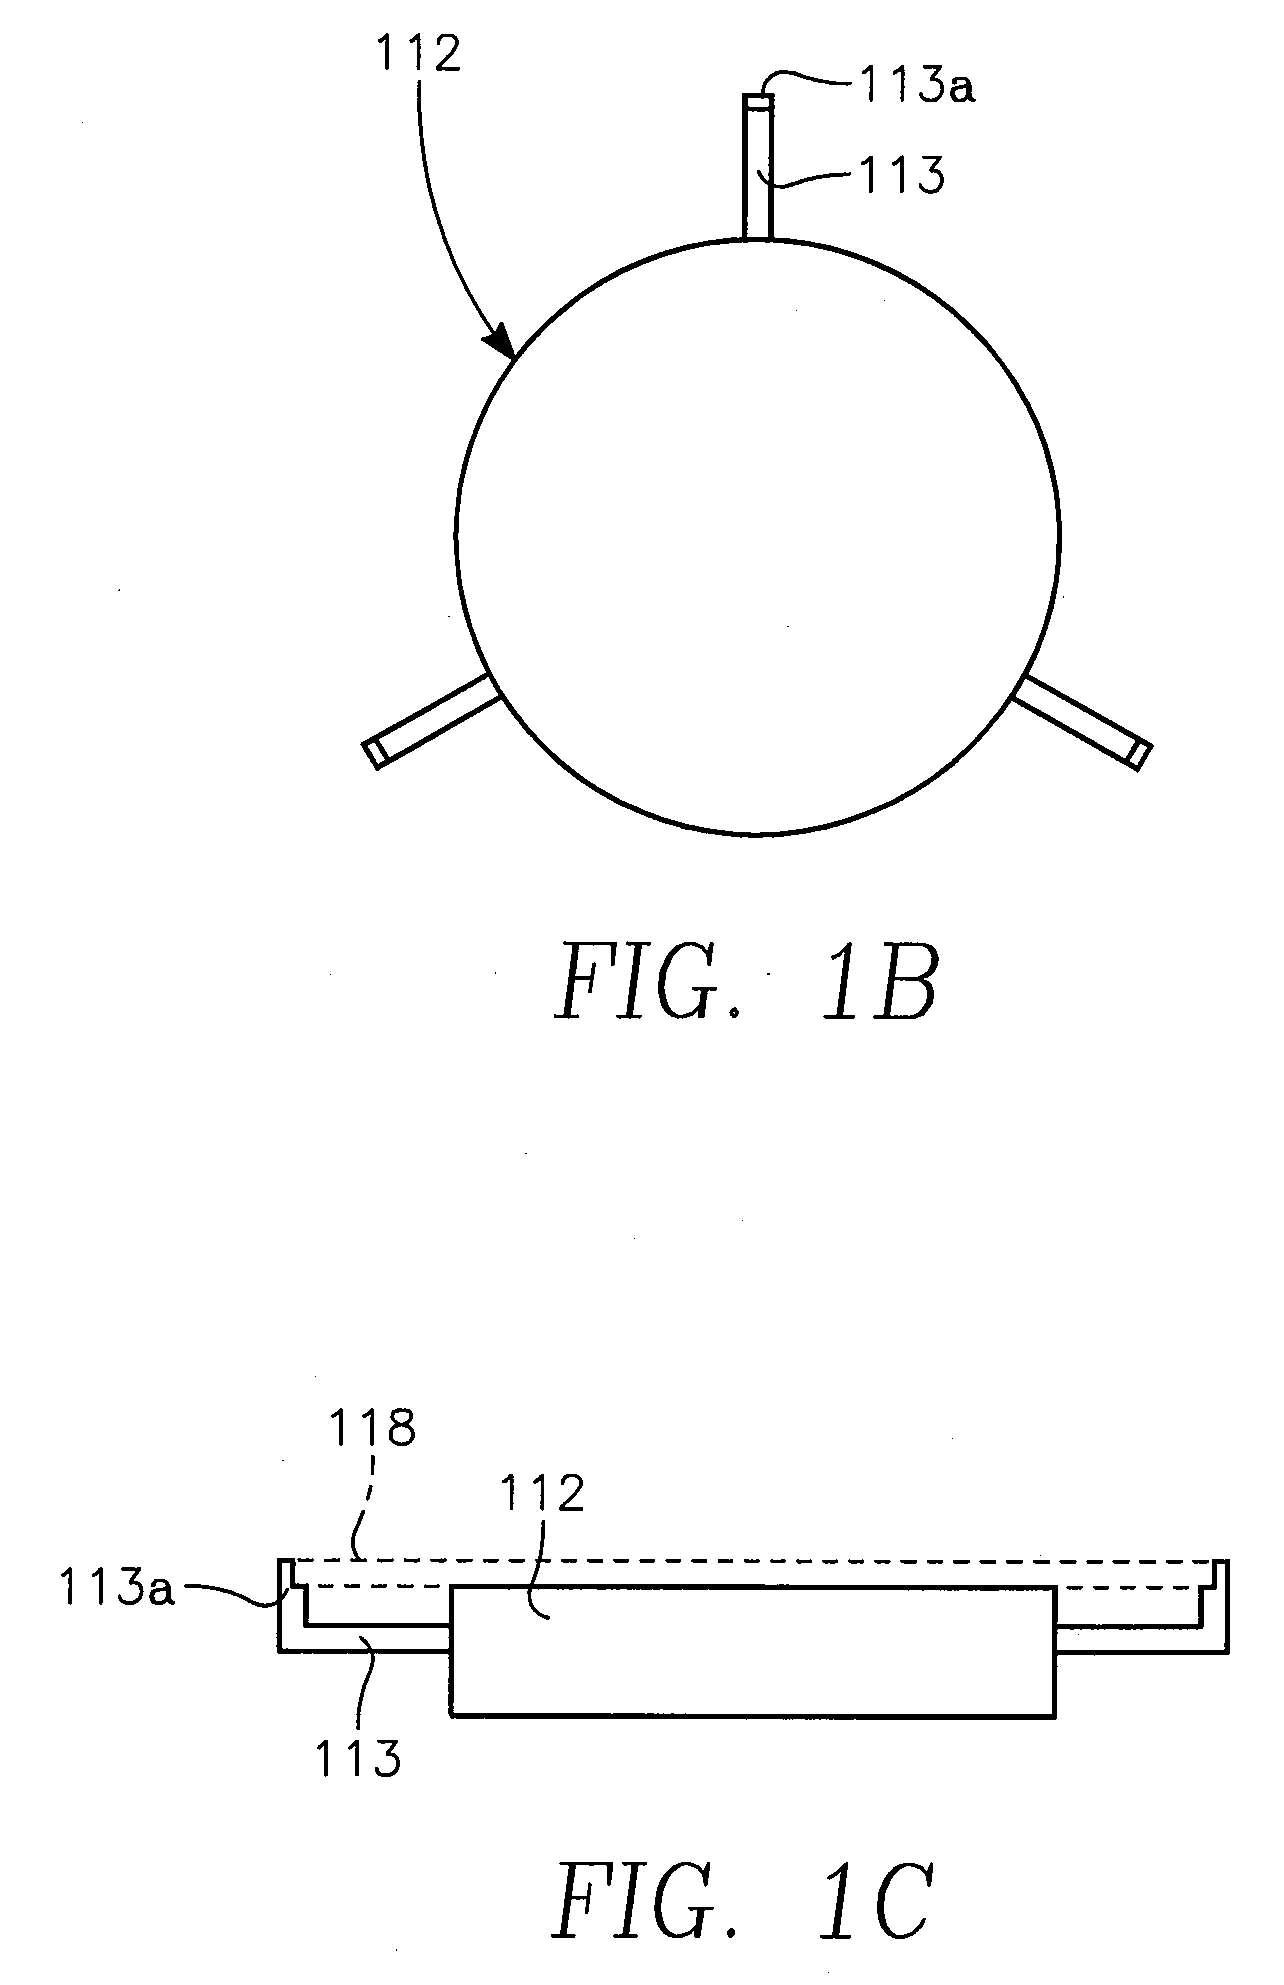 Process for wafer backside polymer removal with wafer front side gas purge